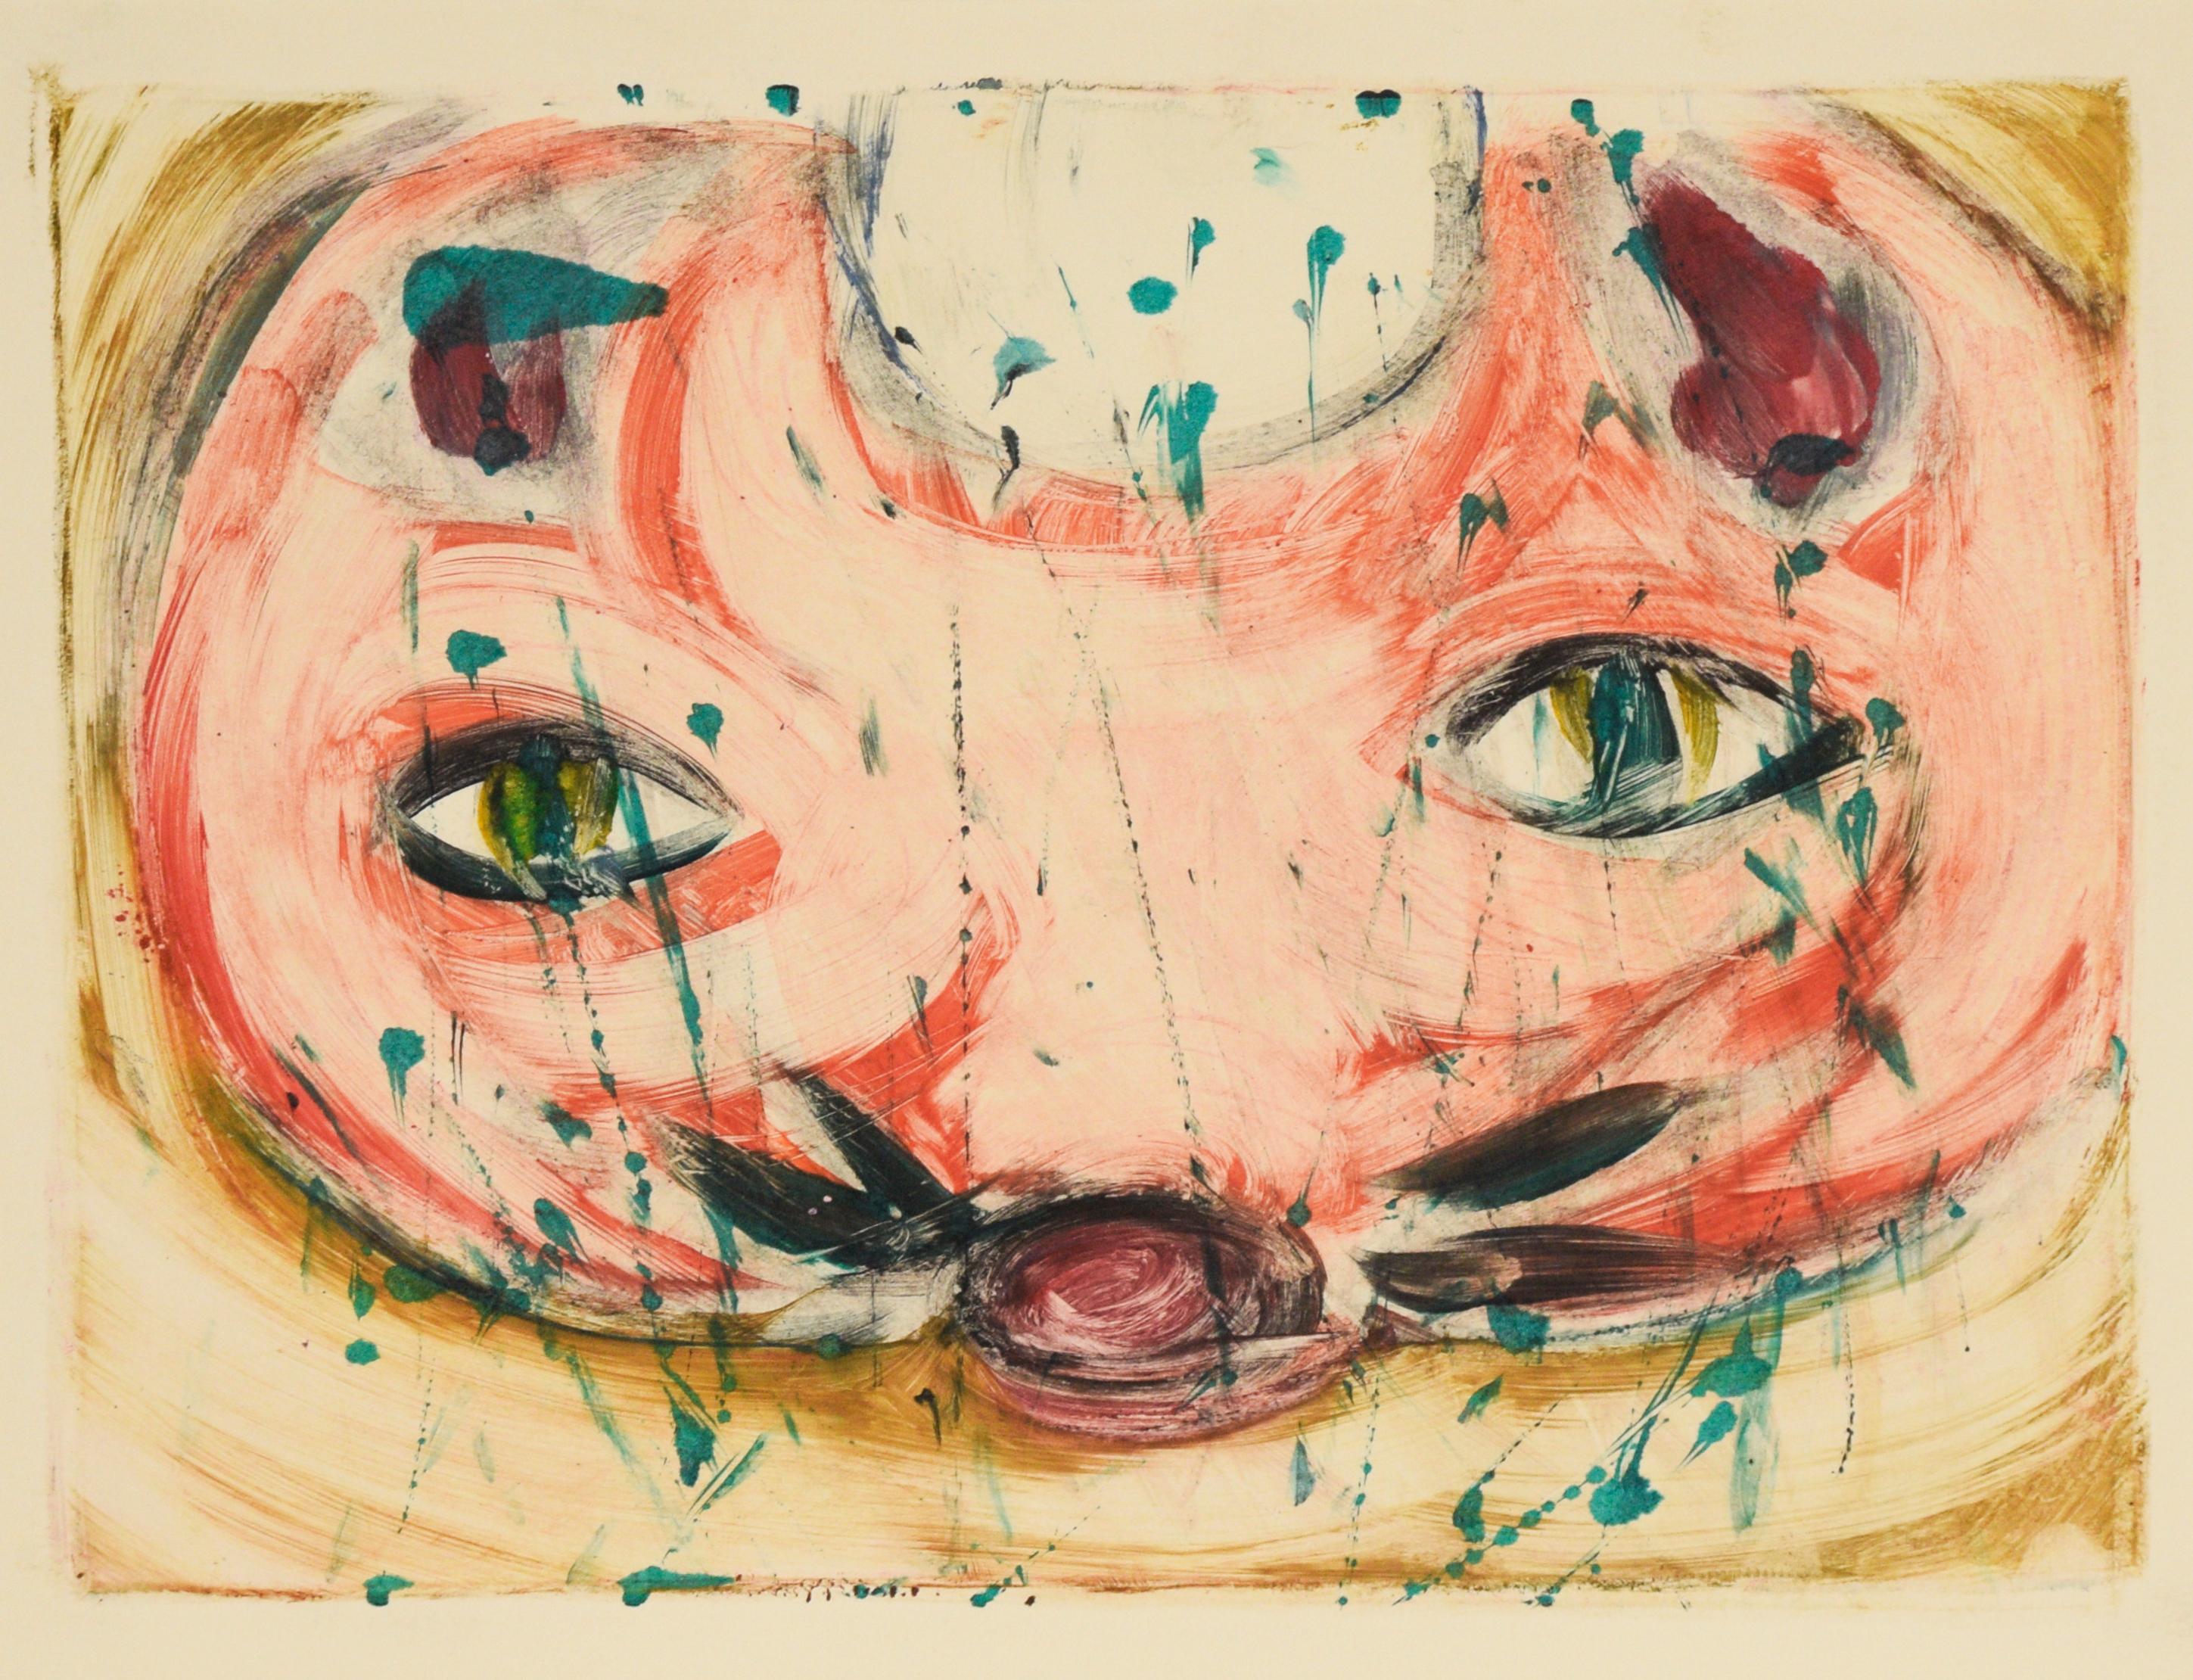 A Cat's Eyes - Transfer Monotype in Water Based Ink on Paper - Fauvist Painting by Heather Speck